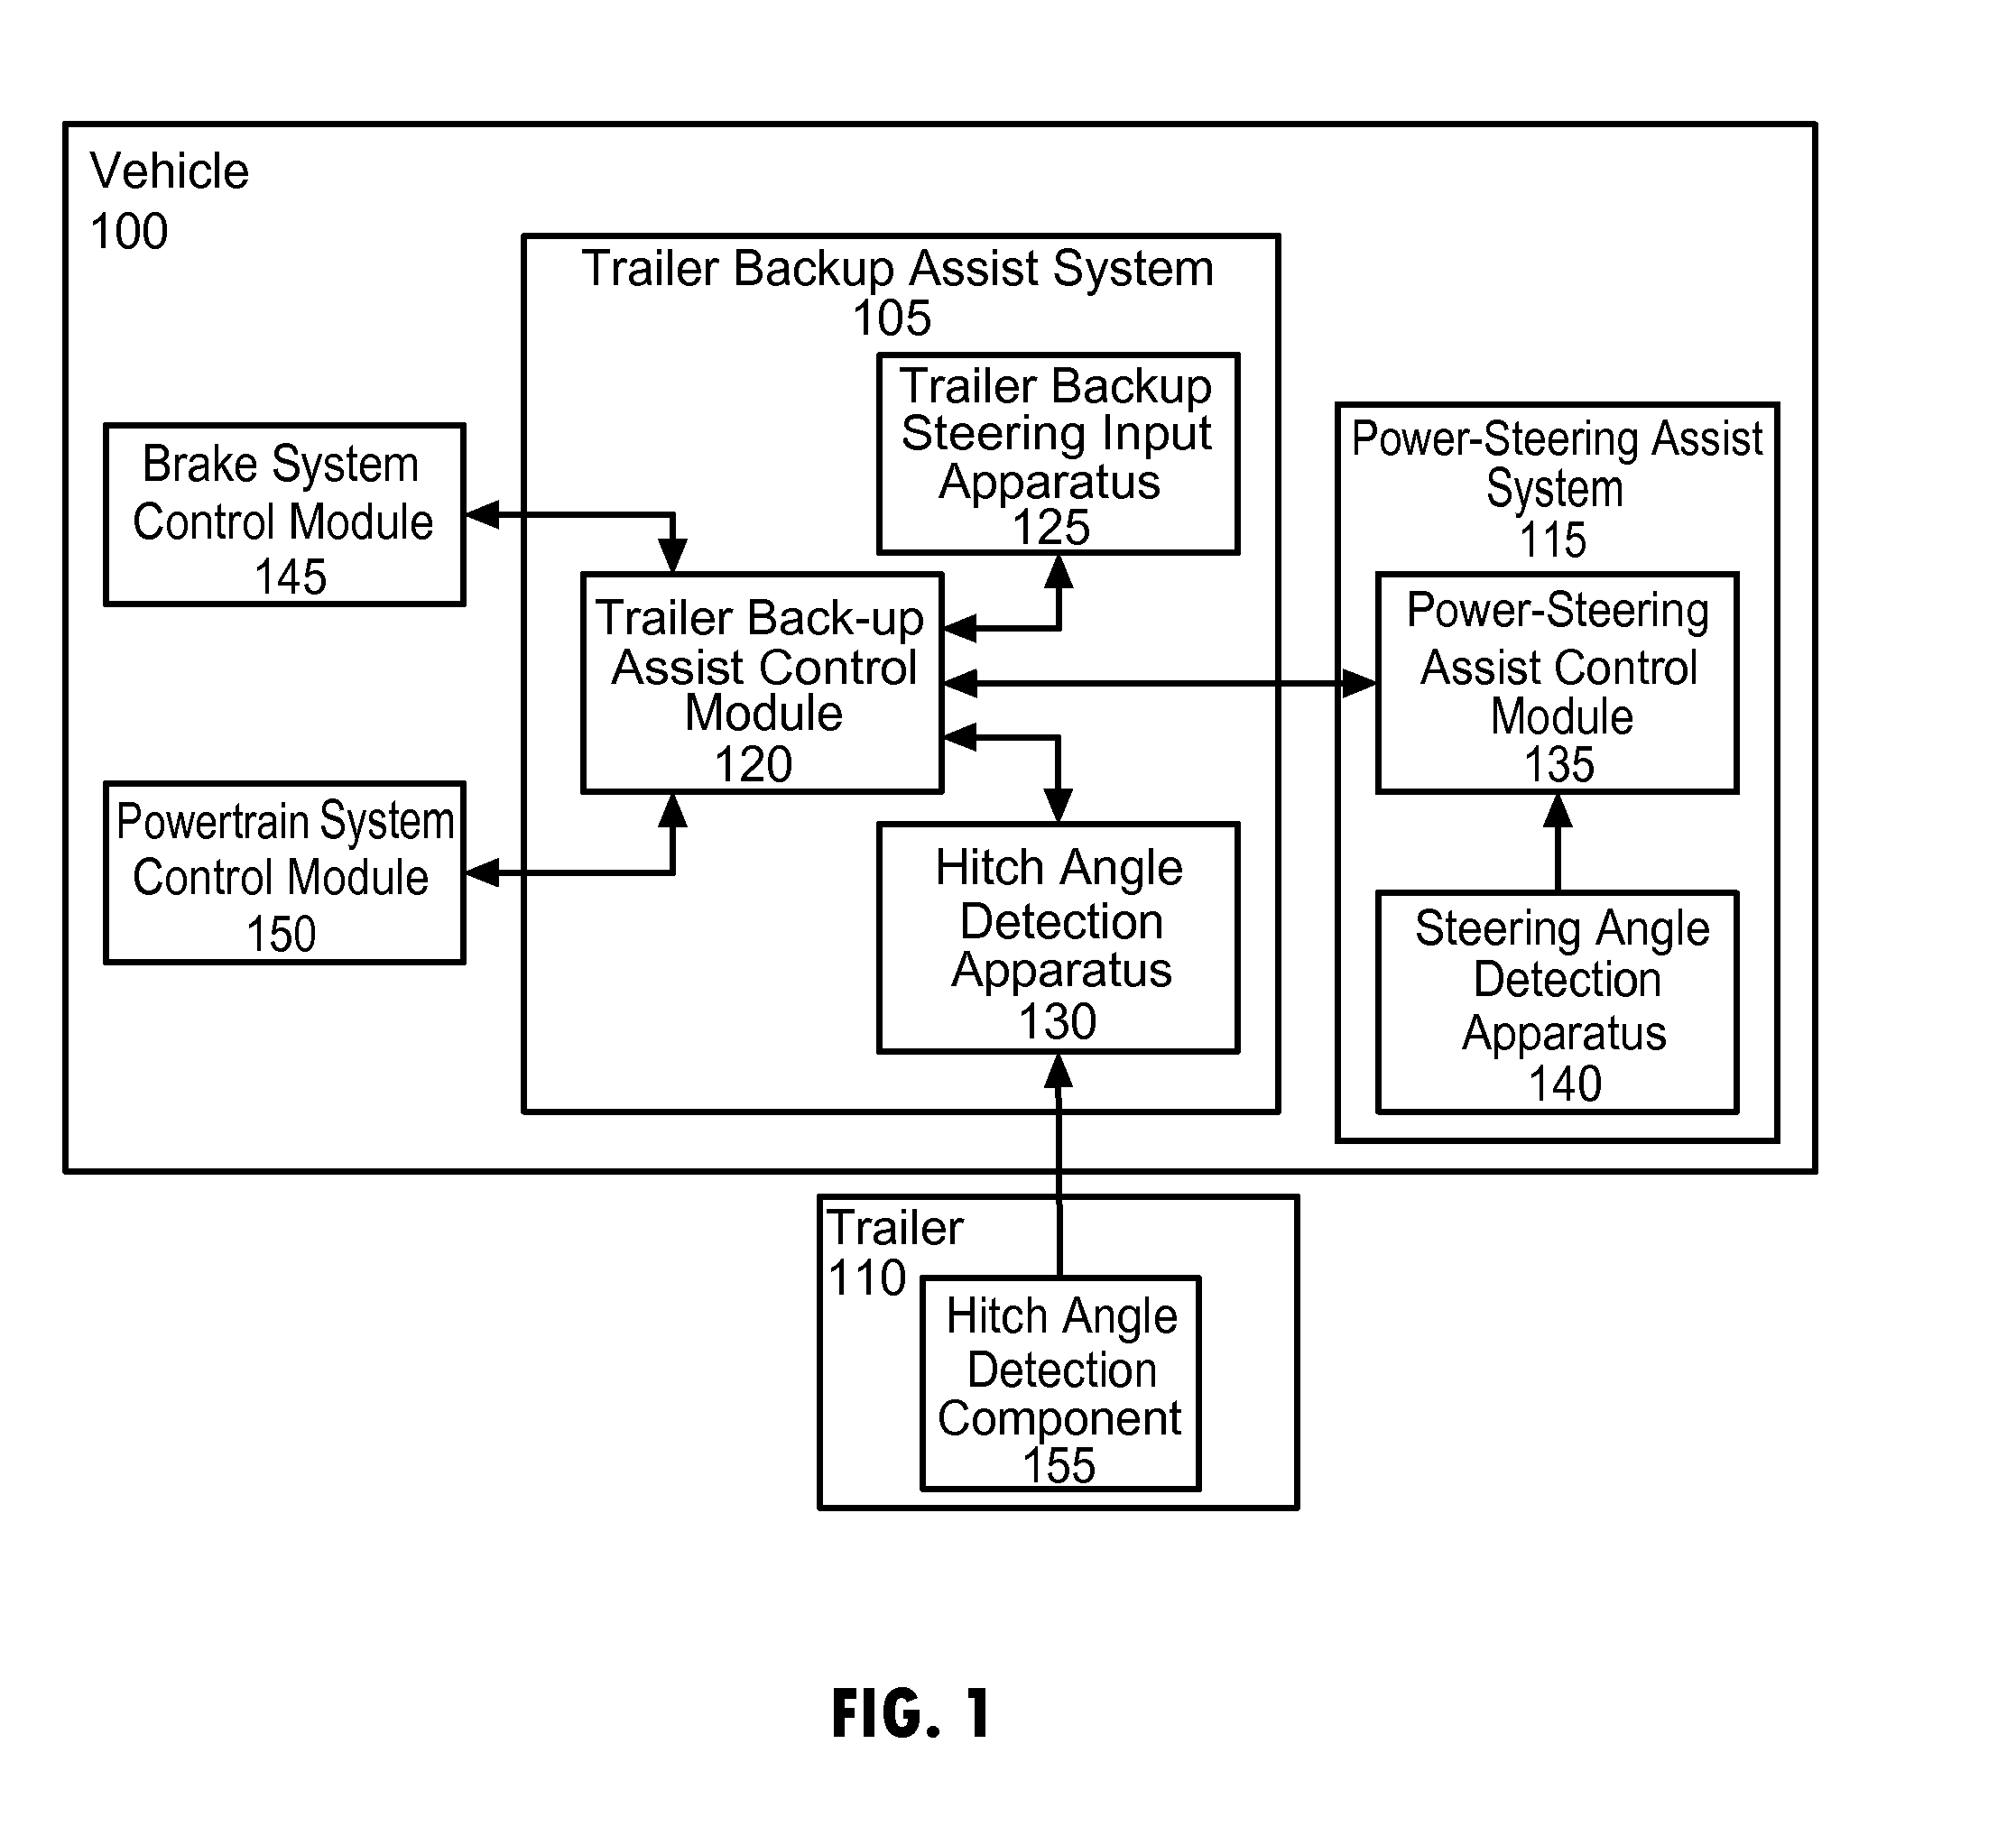 Display system utilizing vehicle and trailer dynamics